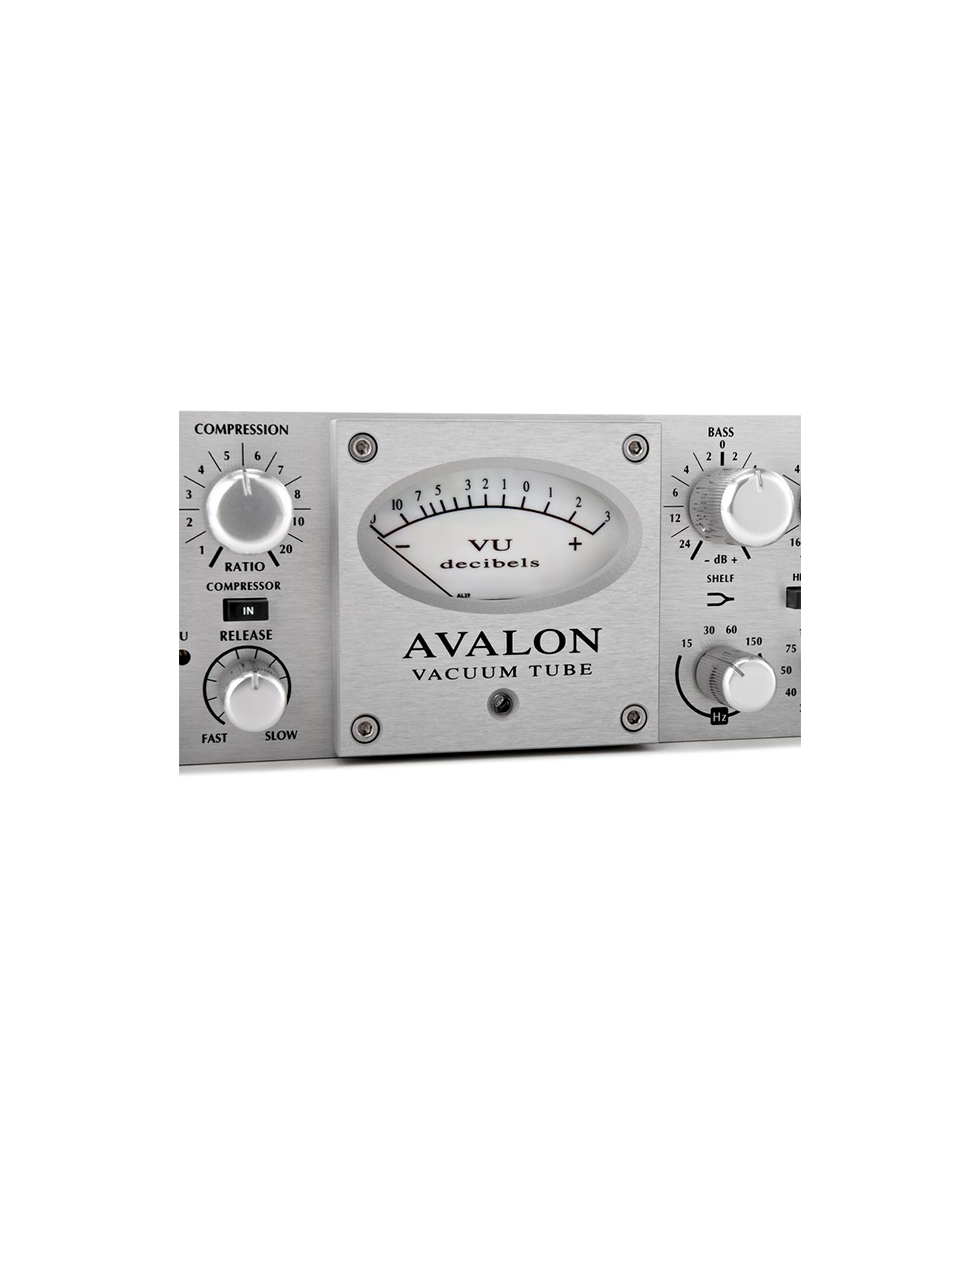 Avalon-737-5597502_800.png